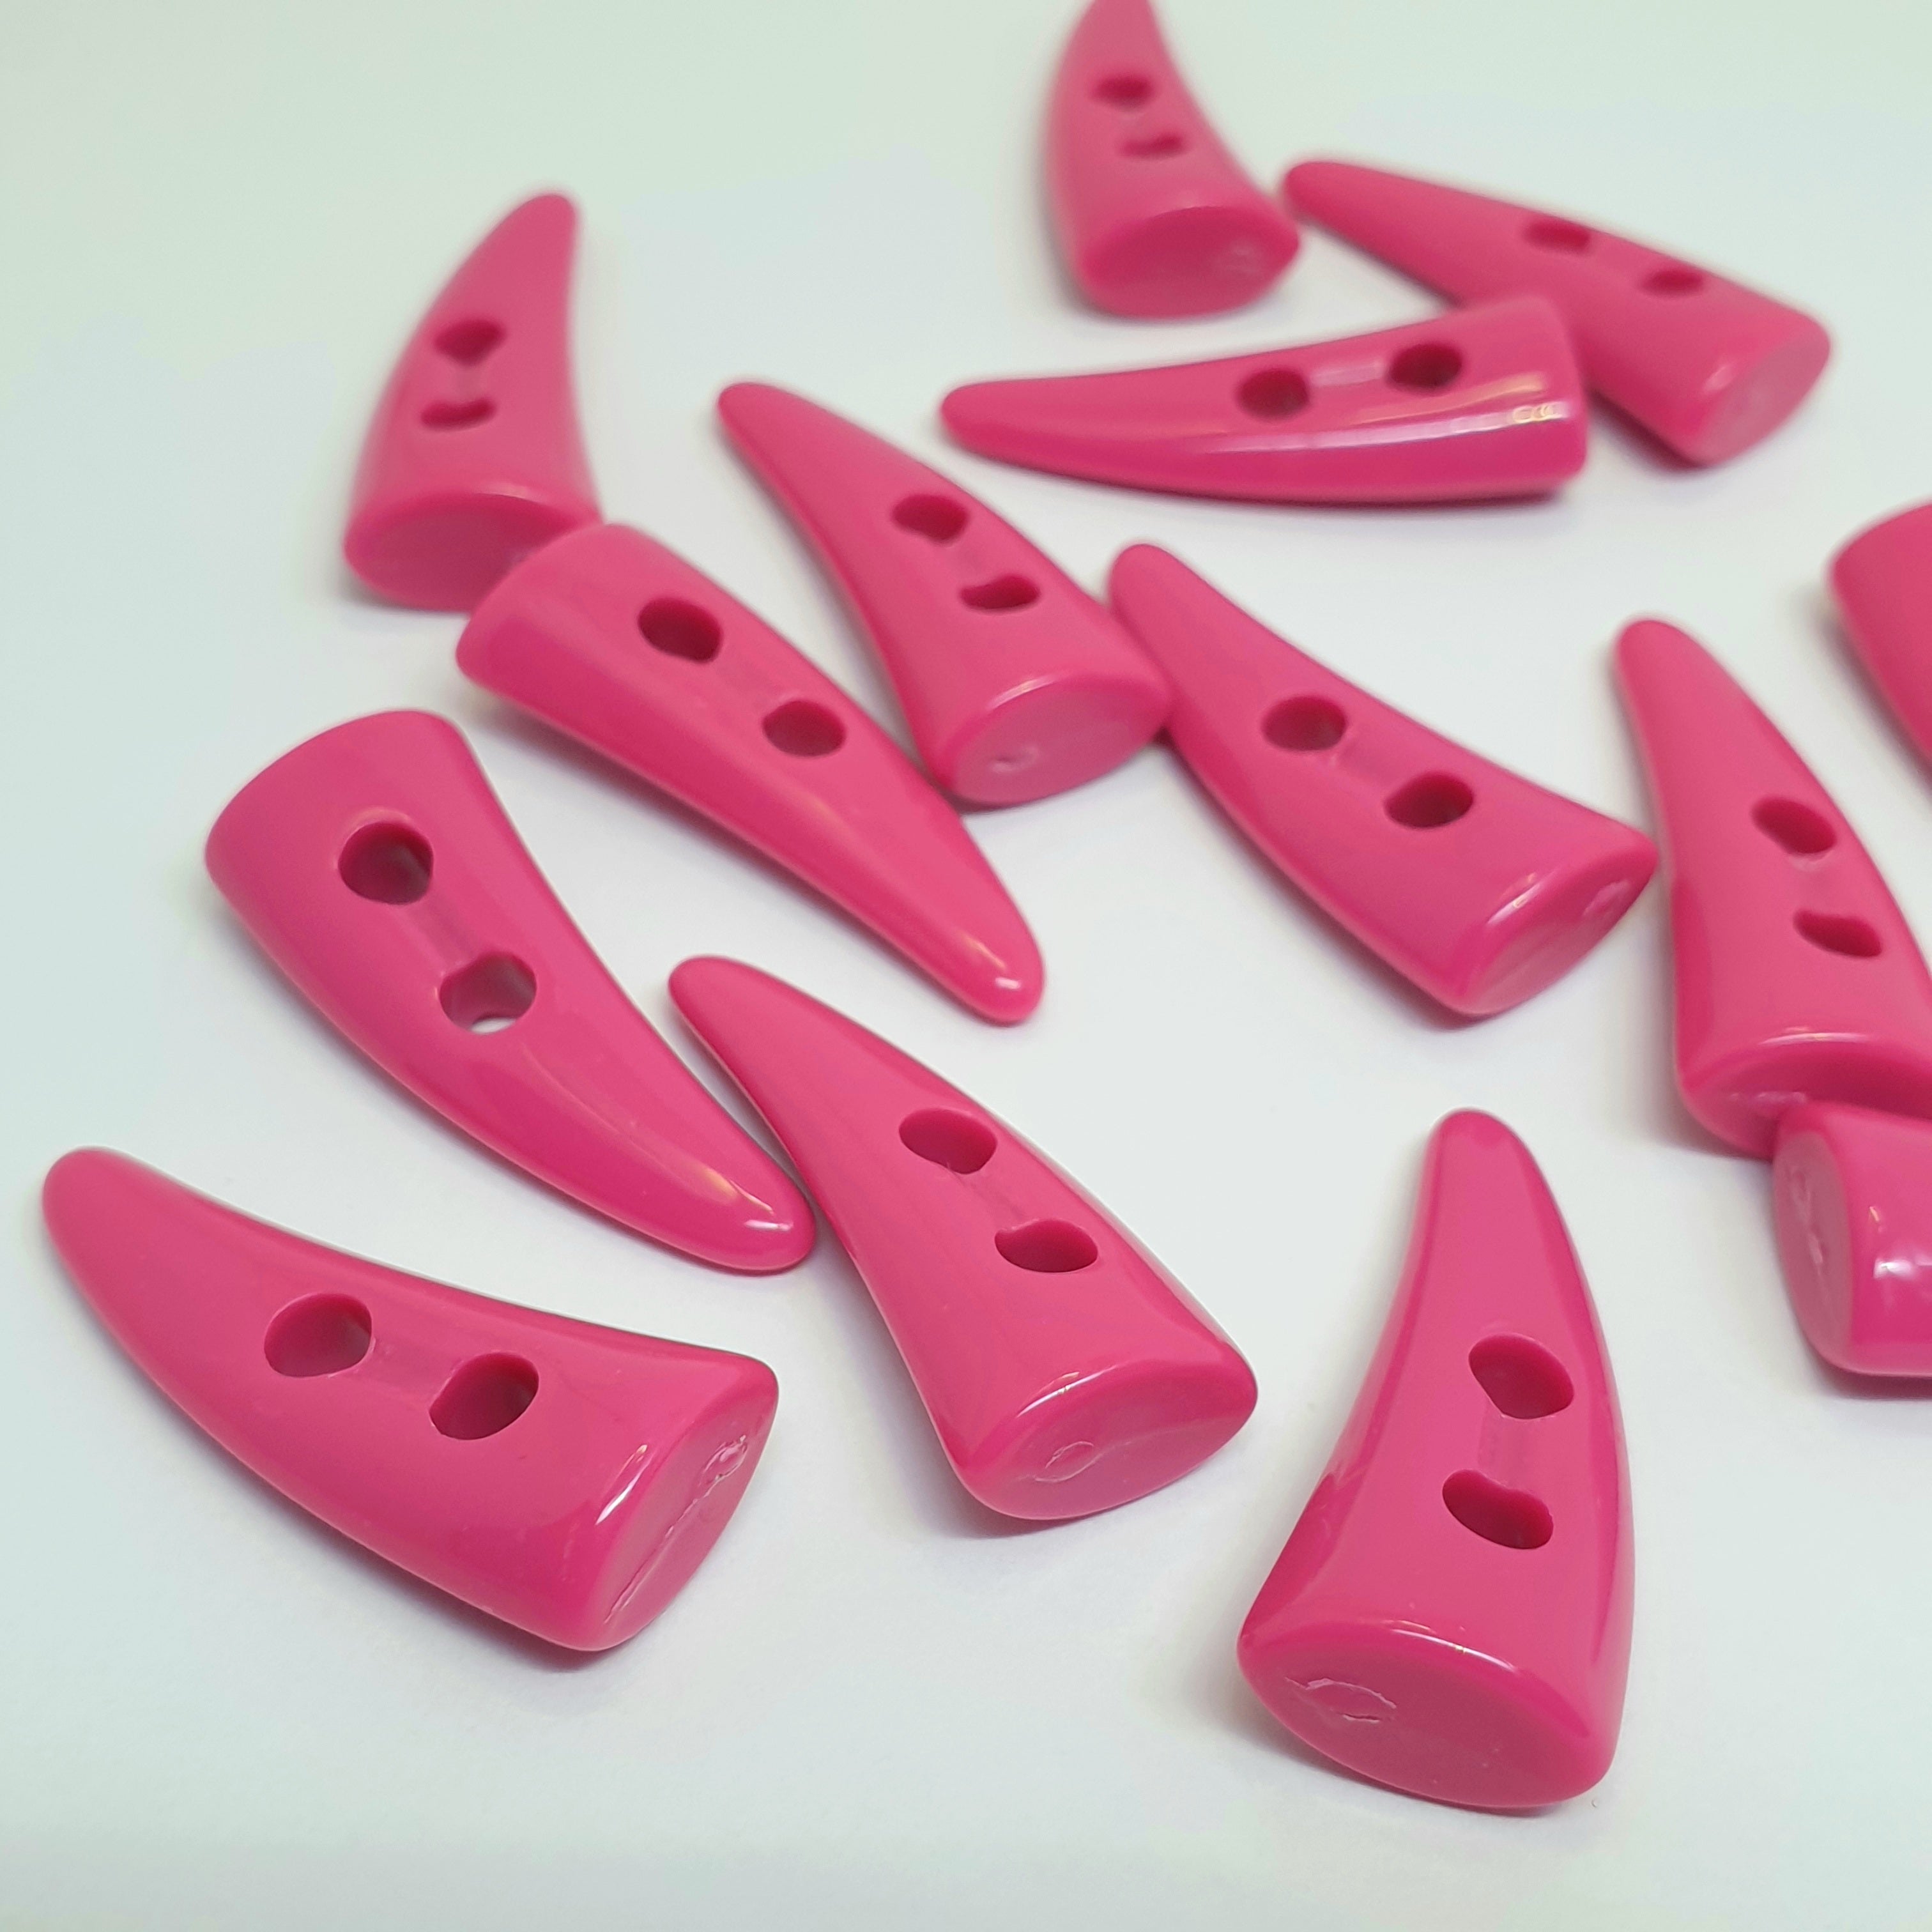 MajorCrafts 16pcs 30mm Hot Pink Horn/Tooth Shaped 2 Holes Sewing Toggle Acrylic Buttons